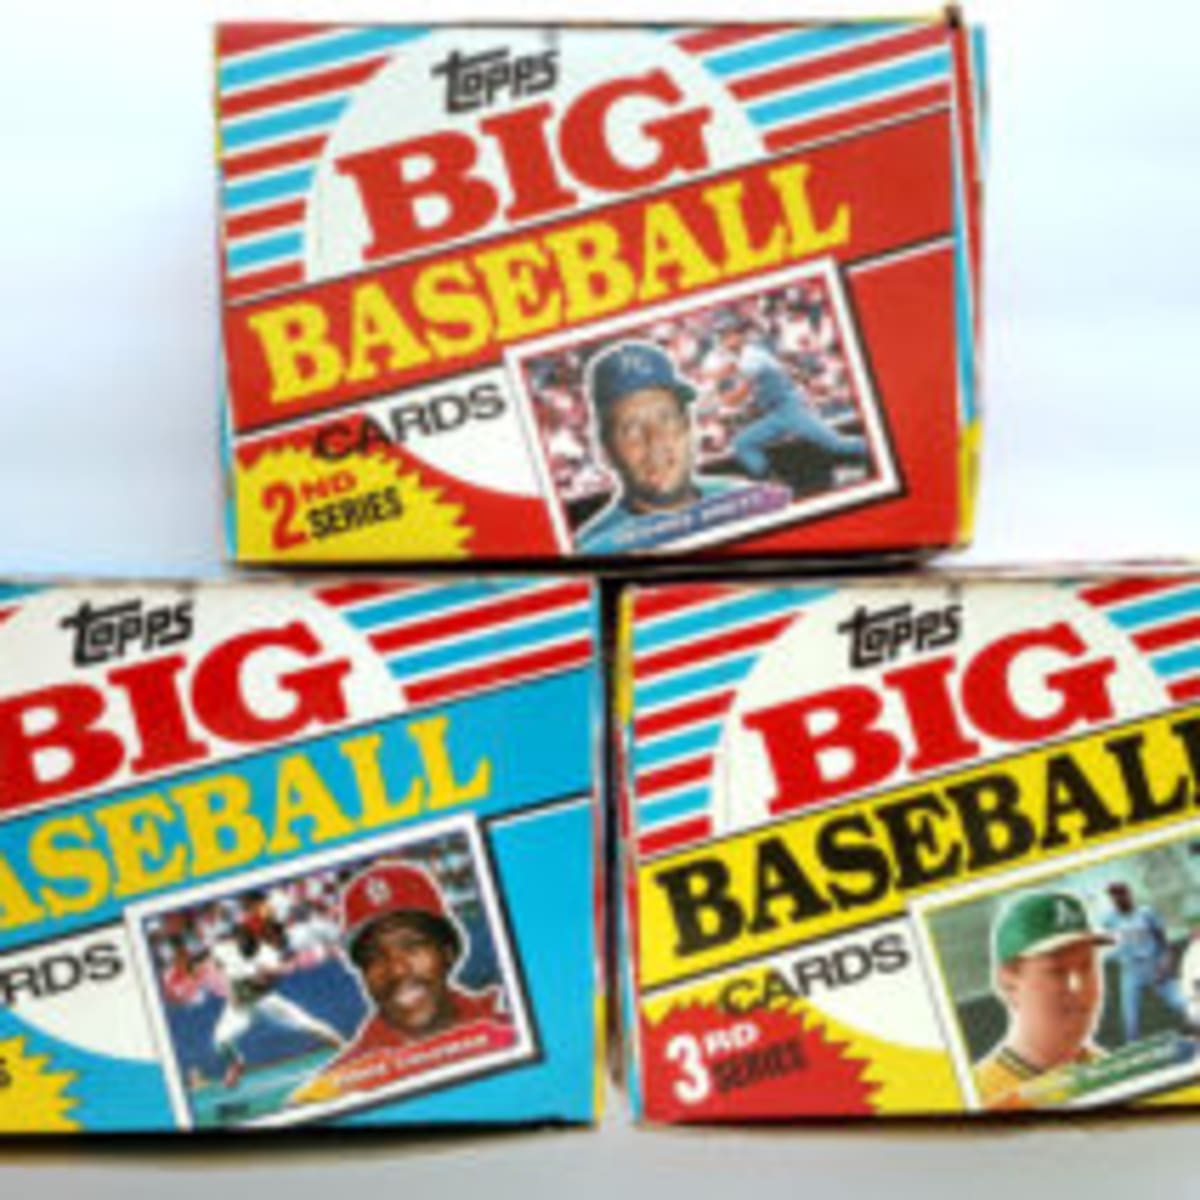 The size of Topps Big Baseball cards played a role in its short